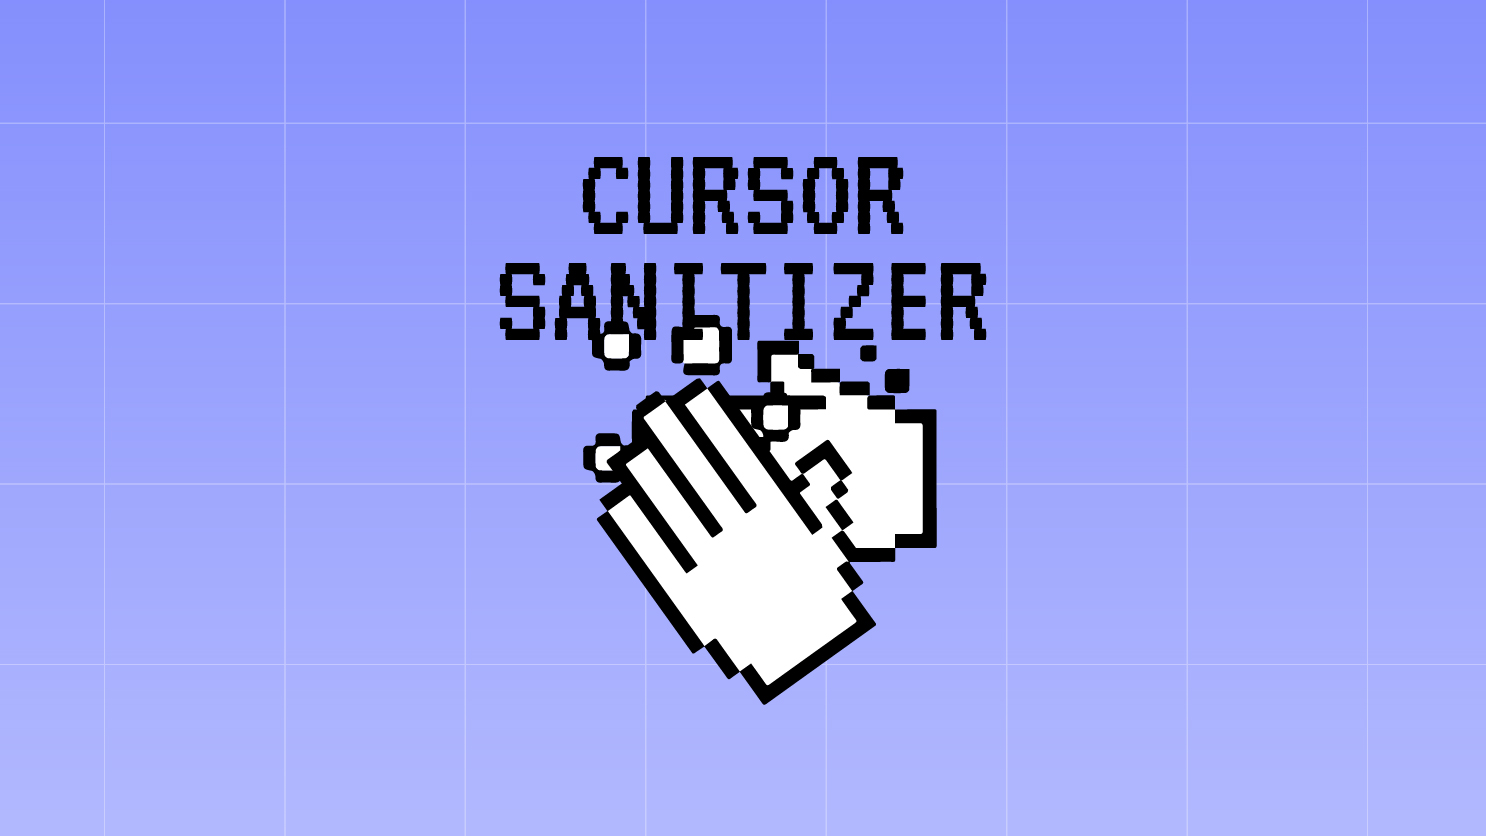 Cursor Sanitizer project - Experimental projects